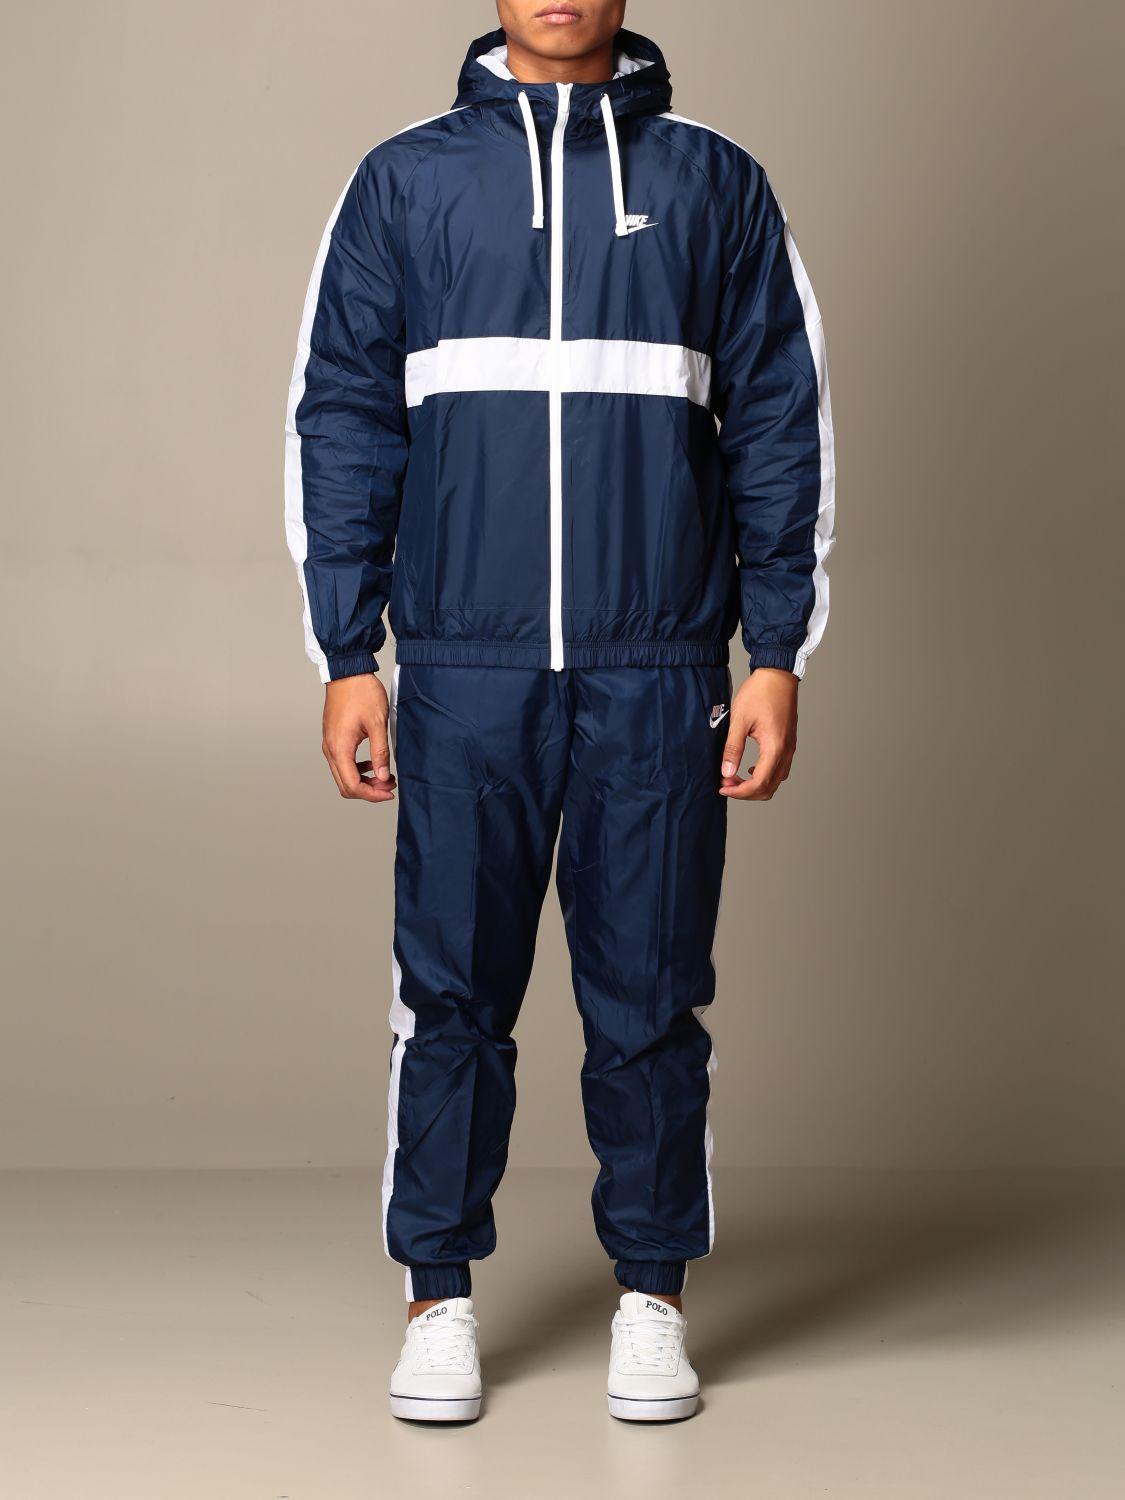 Nike Synthetic Hoxton Woven Tracksuit in Navy (Blue) for Men - Lyst